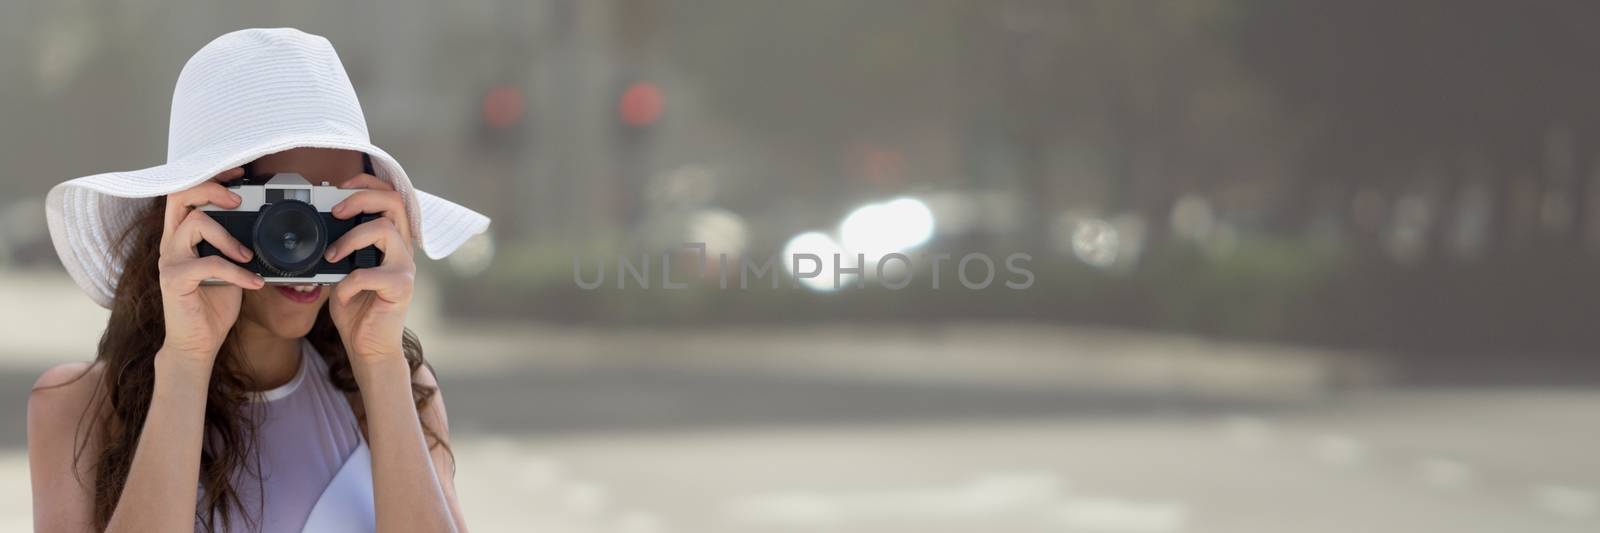 Millennial woman in summer hat with camera against blurry street by Wavebreakmedia